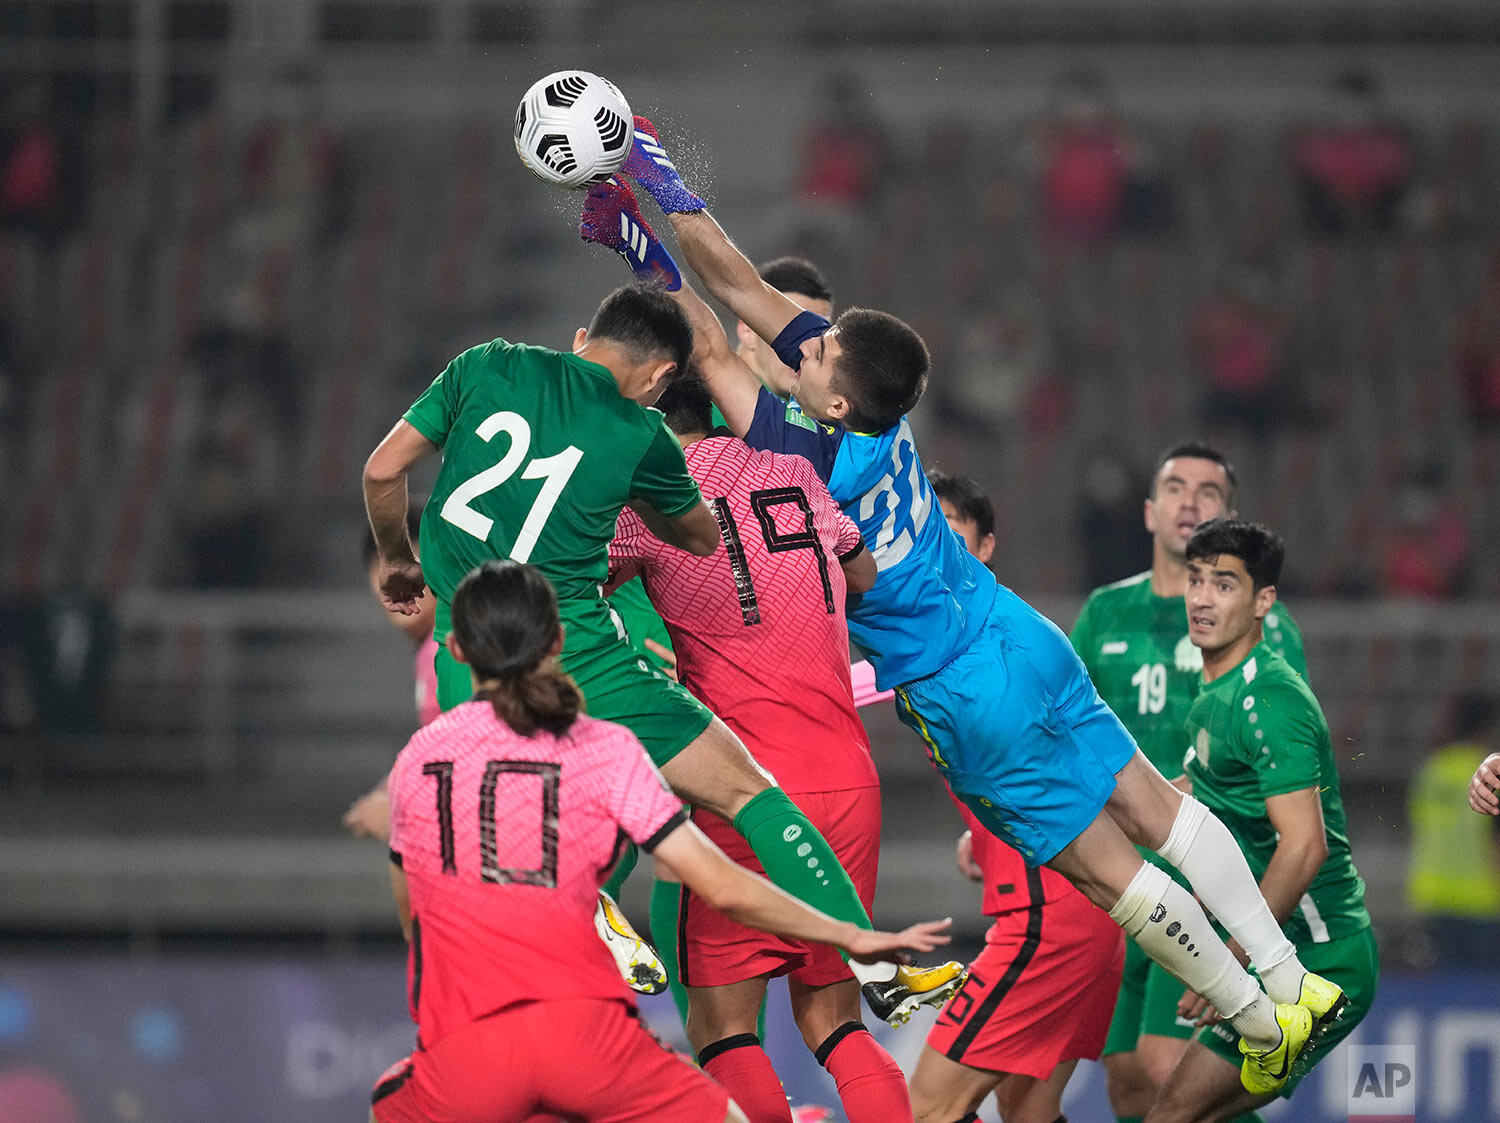  Turkmenistan's goalkeeper Charyyev Rasul punches the ball during their Asian zone Group H qualifying soccer match against South Korea for the FIFA World Cup Qatar 2022 at Goyang stadium in Goyang, South Korea, Saturday, June 5, 2021. (AP Photo/Lee J